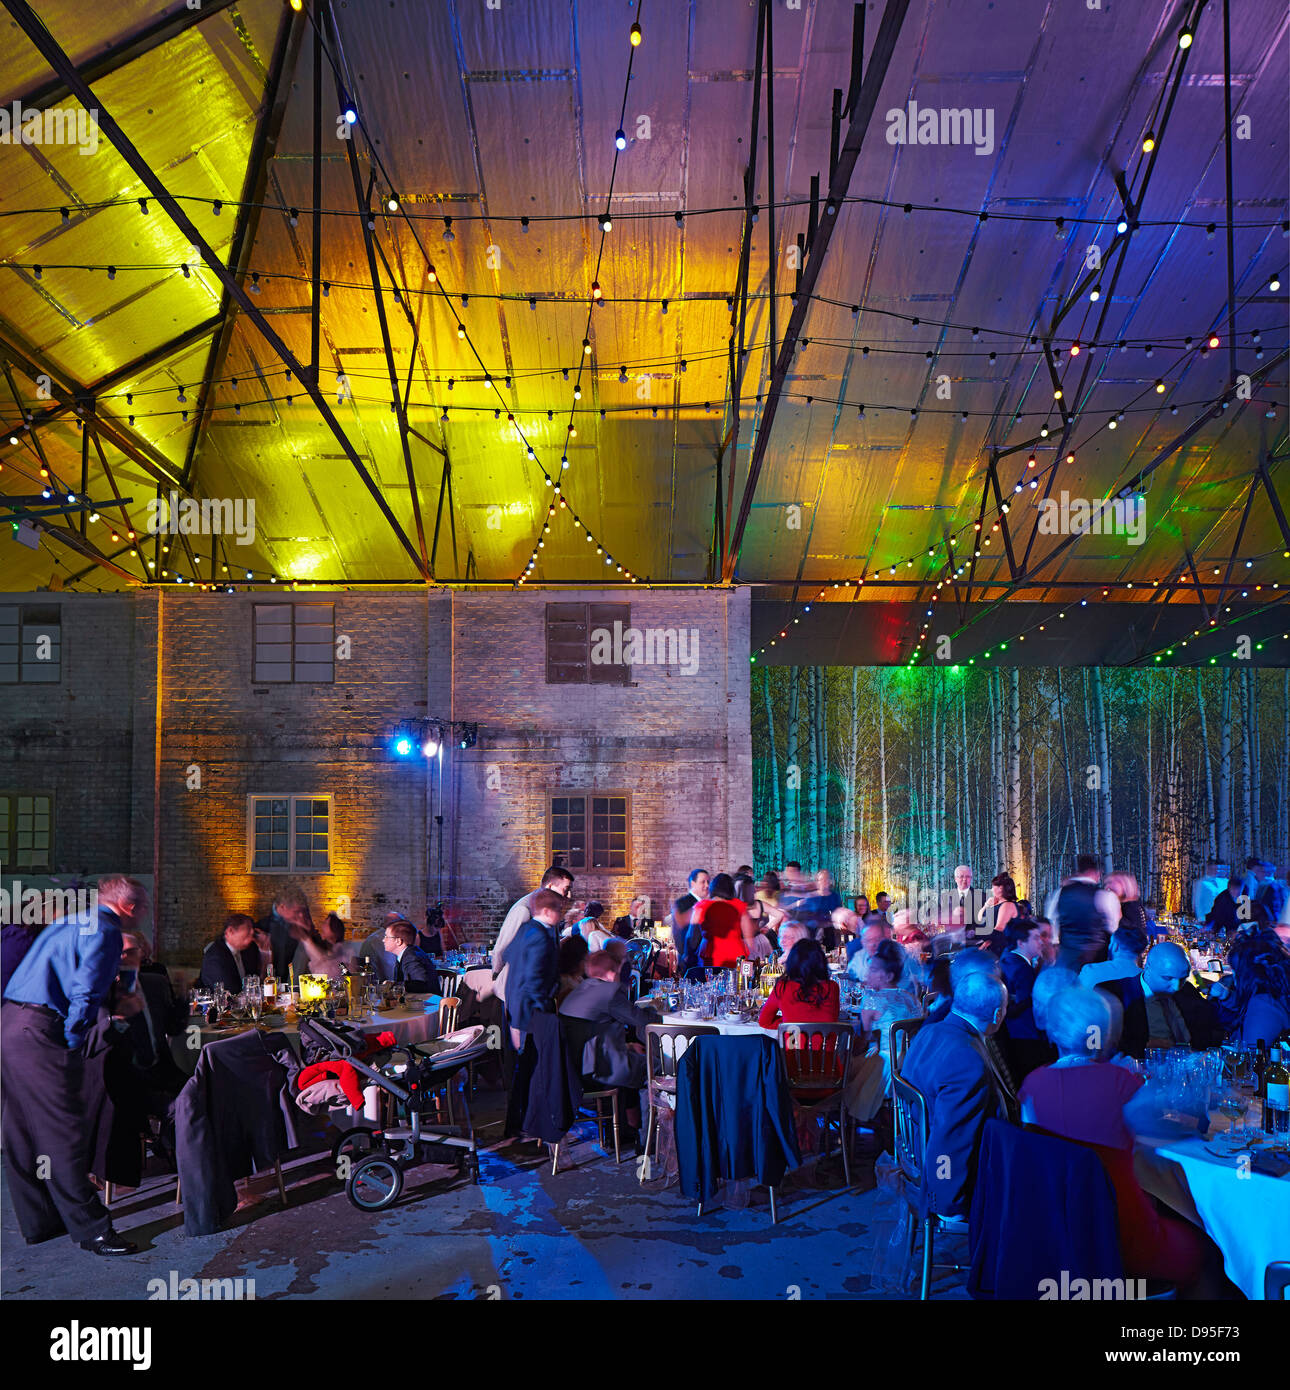 Camp and Furnace, Liverpool, United Kingdom. Architect: FWMA+ & Smiling  Wolf, 2012. Multifunctional event hall Stock Photo - Alamy